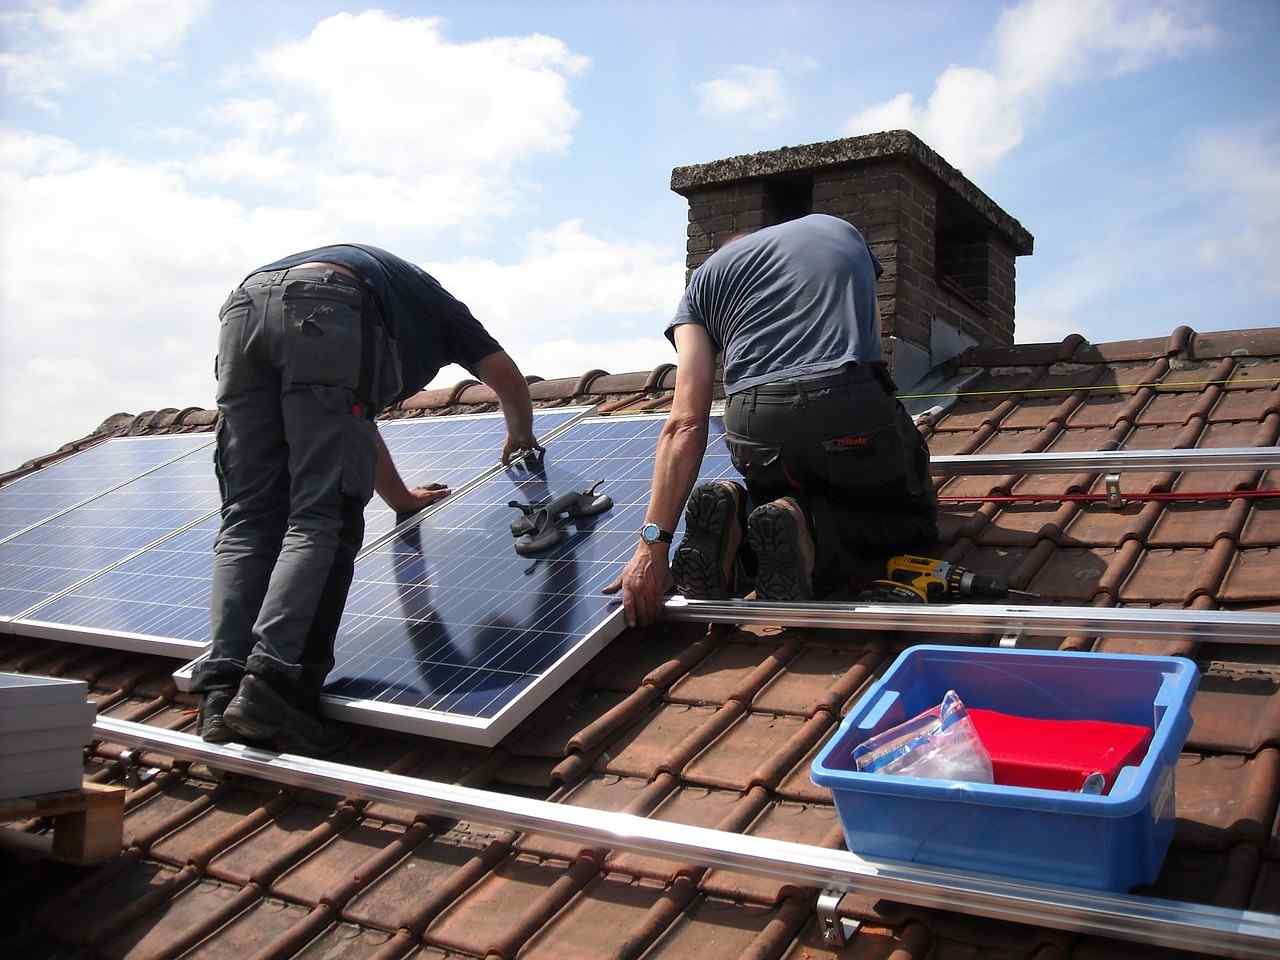 What Are The Benefits Of Installing Solar Panels For My Property?